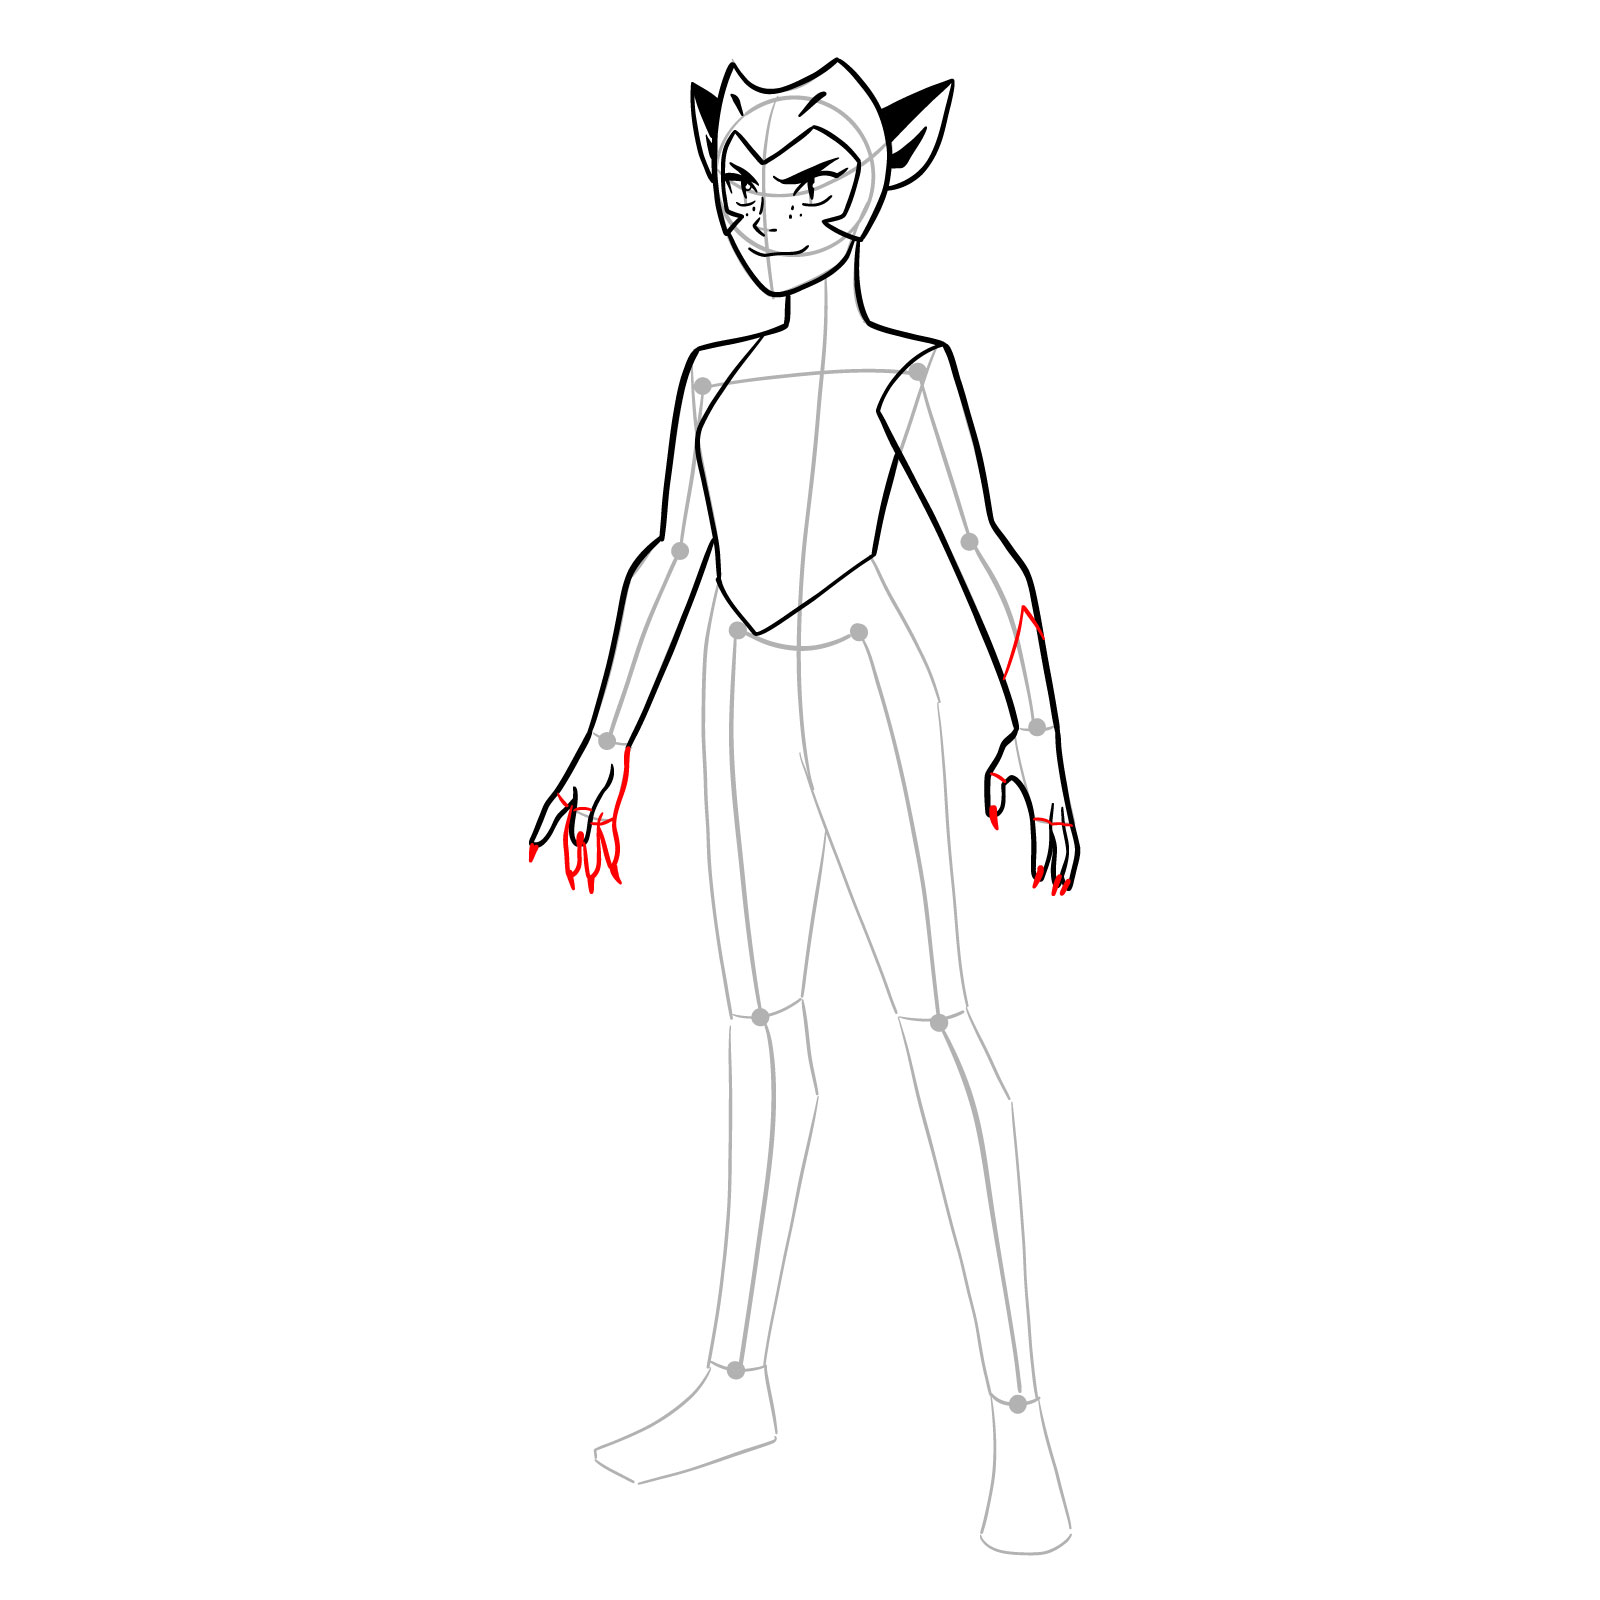 How to draw Catra from She-Ra and the Princesses of Power - step 12